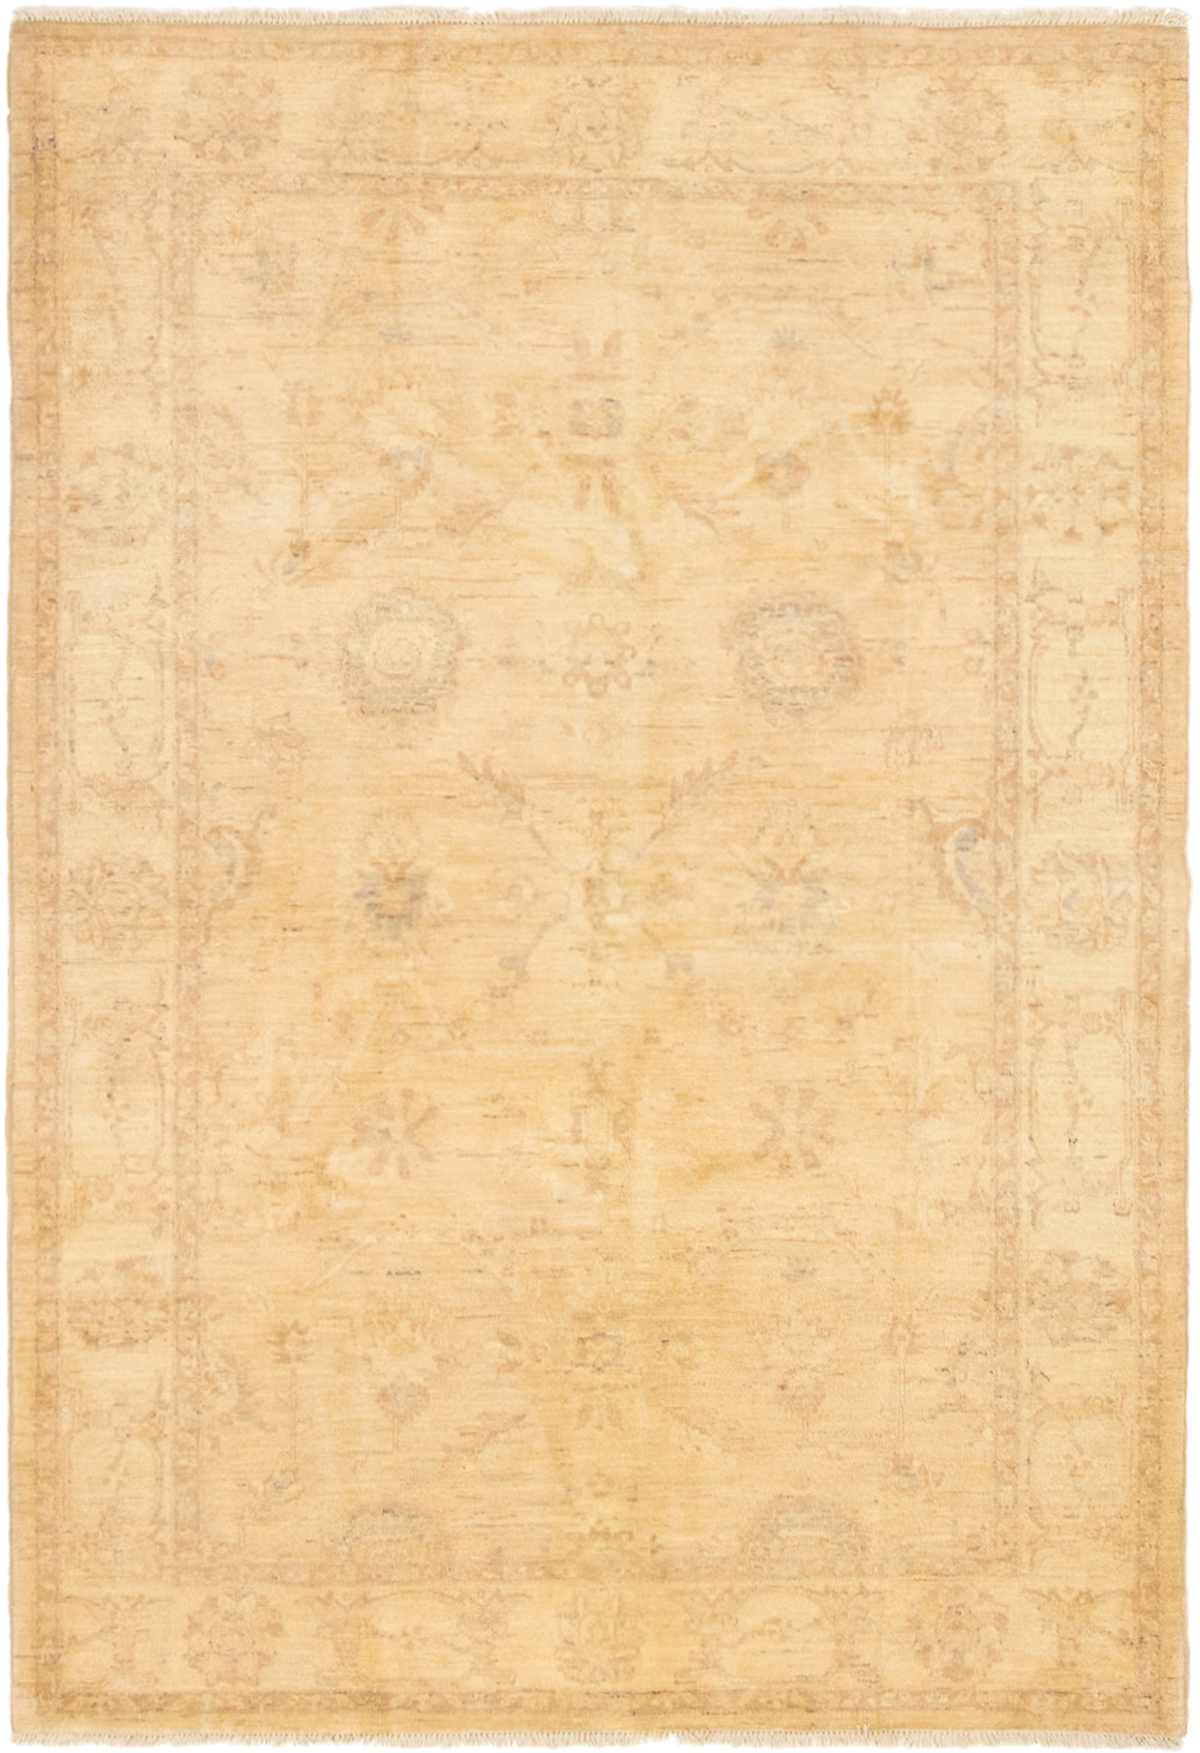 Hand-knotted Chobi Finest Cream Wool Rug 6'1" x 8'9"  Size: 6'1" x 8'9"  